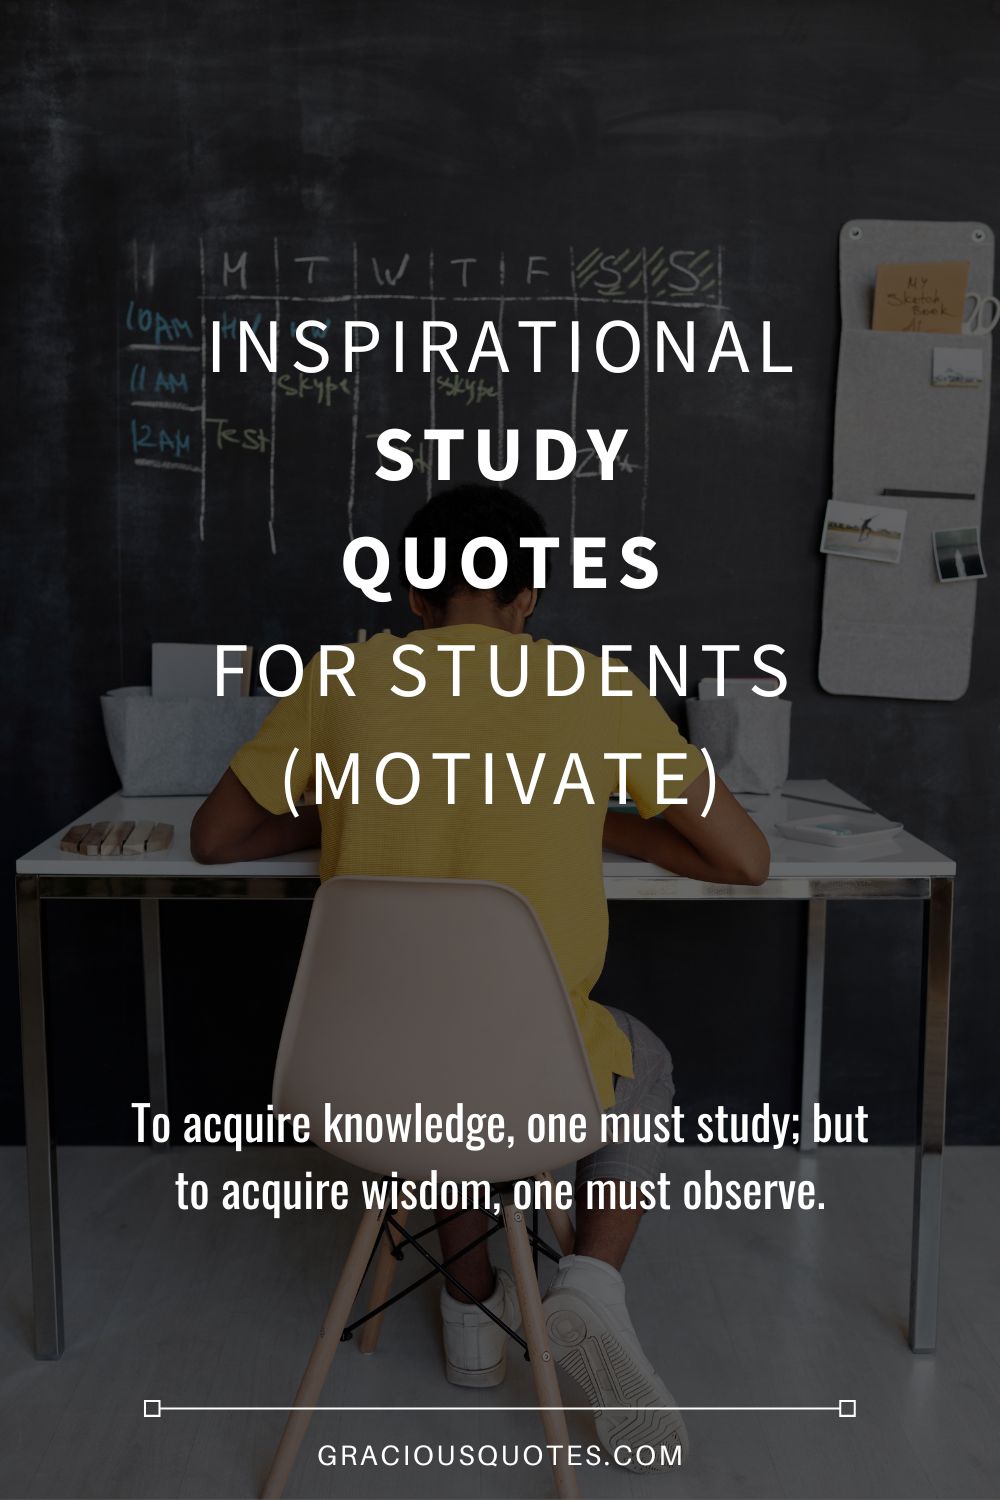 74 Inspirational Study Quotes for Students (MOTIVATE)